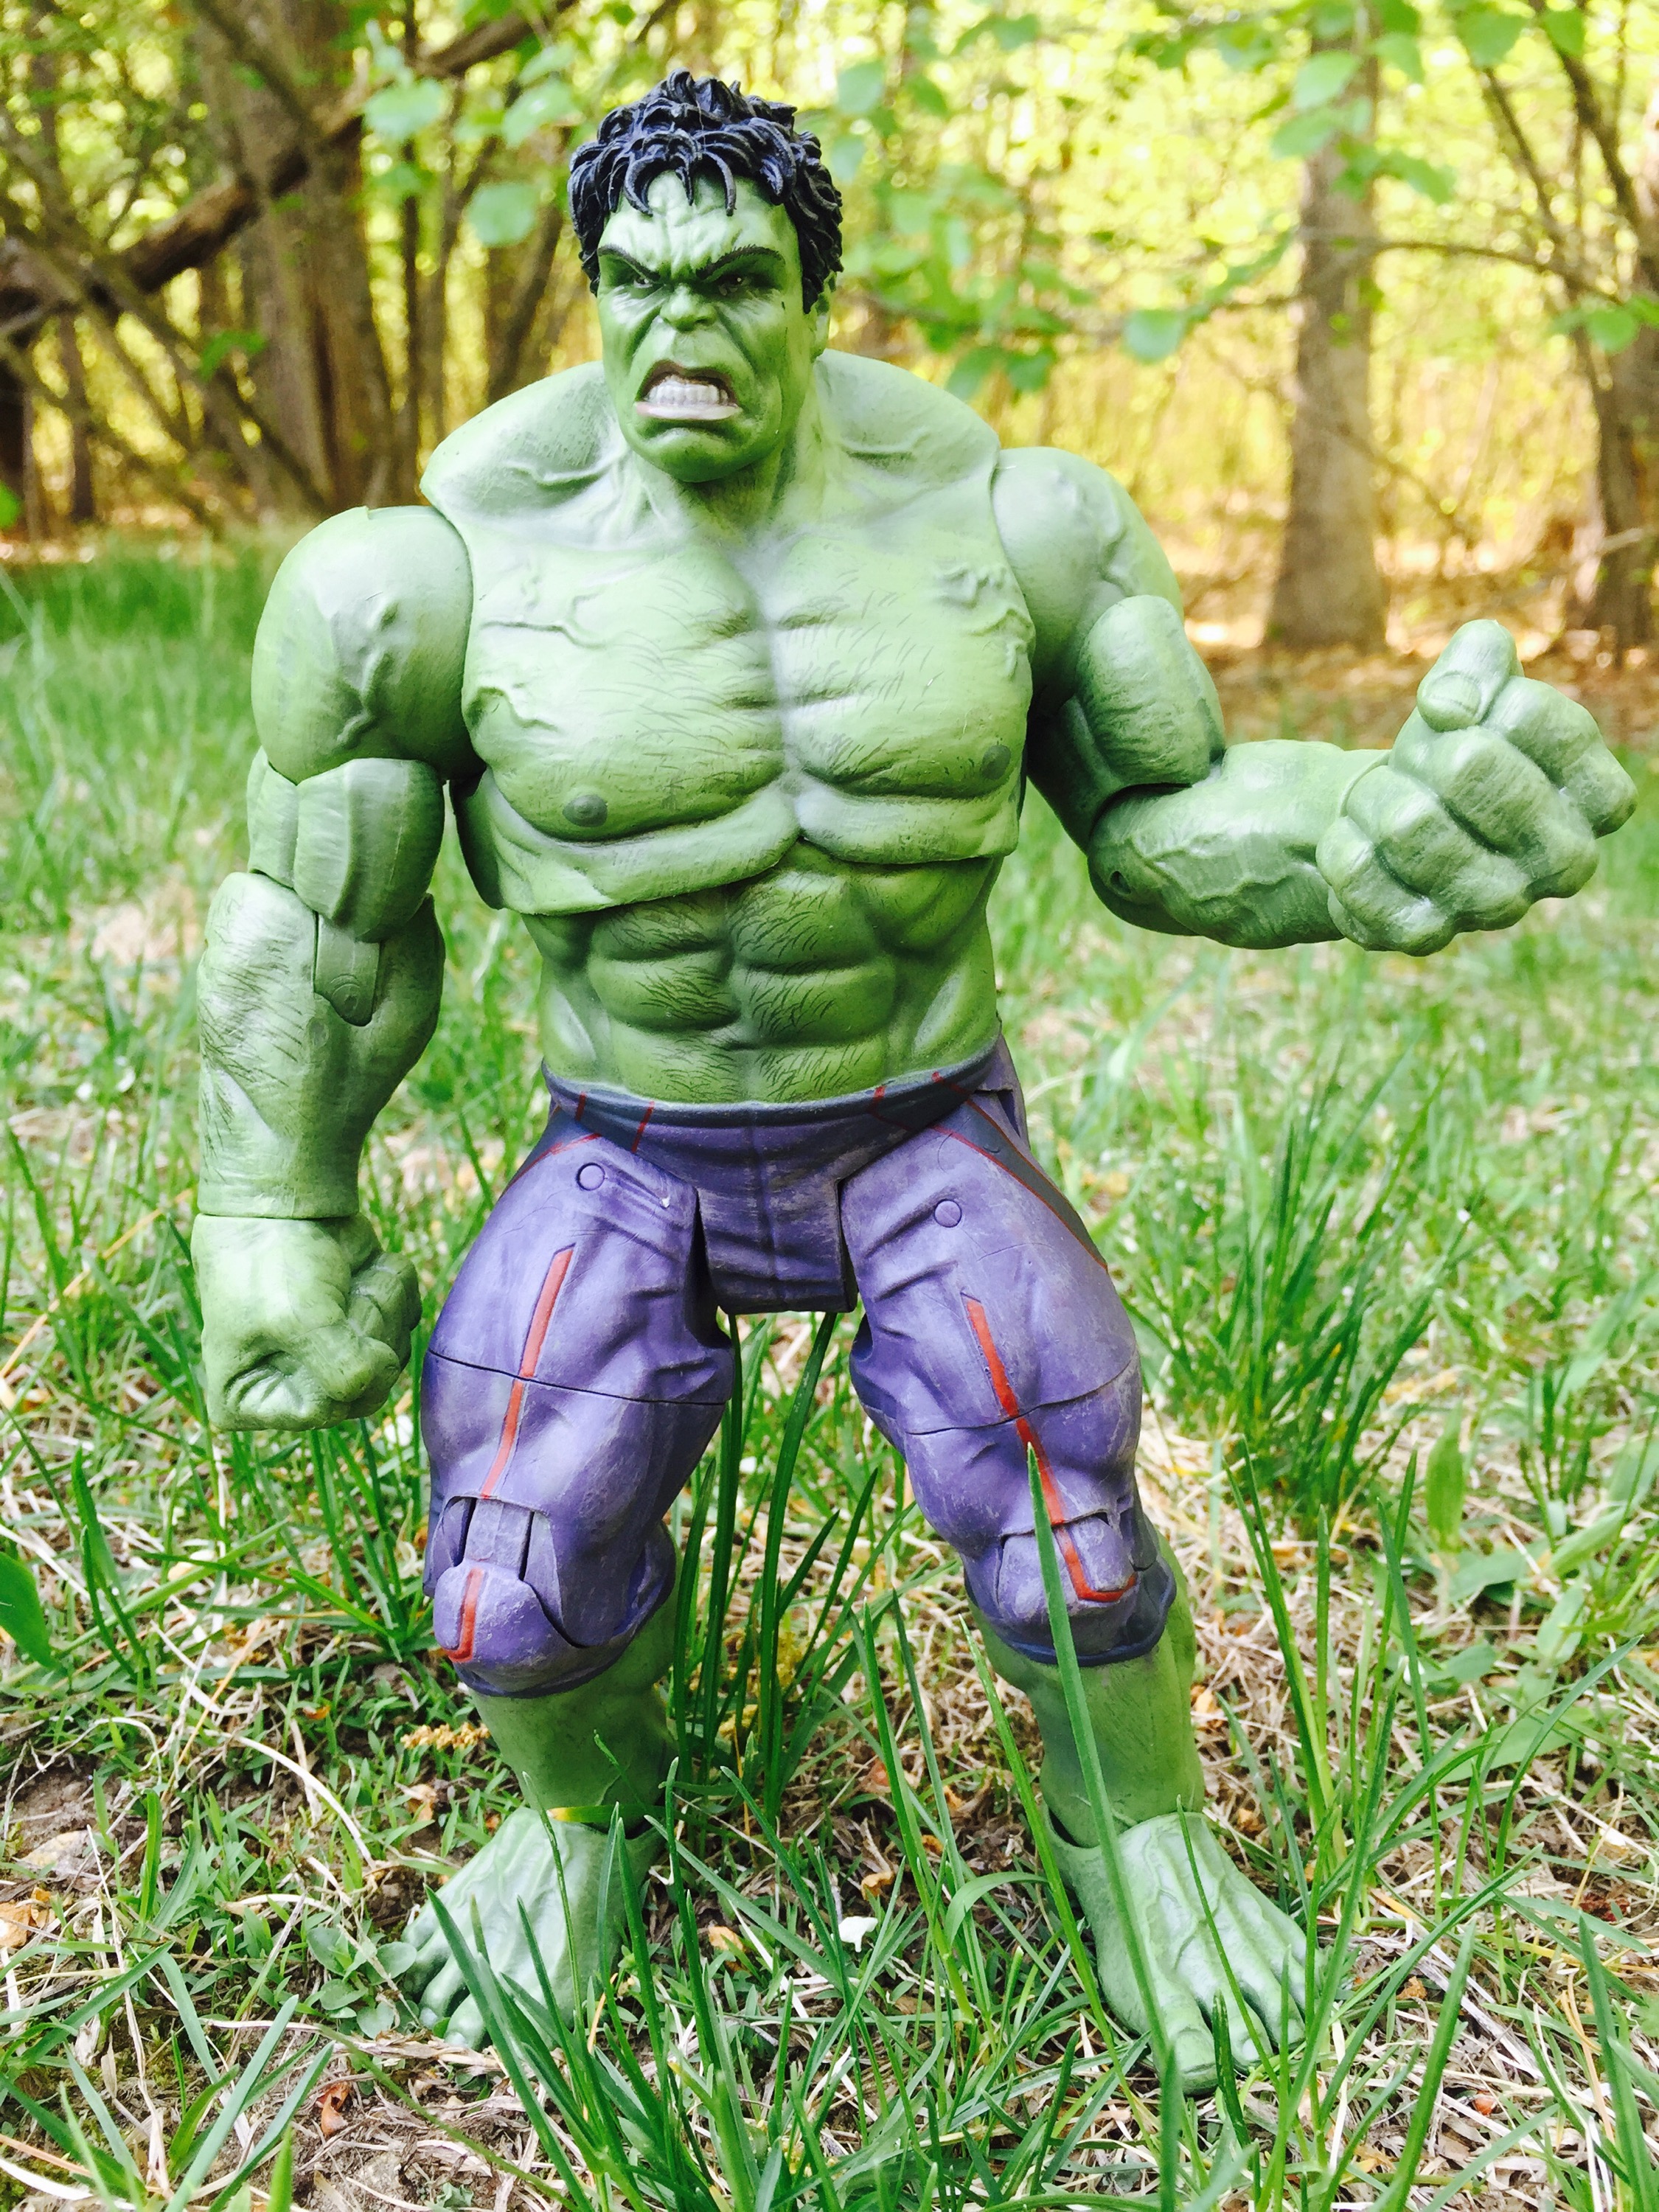 Marvel Select Avengers Age of Ultron Hulk Figure Review